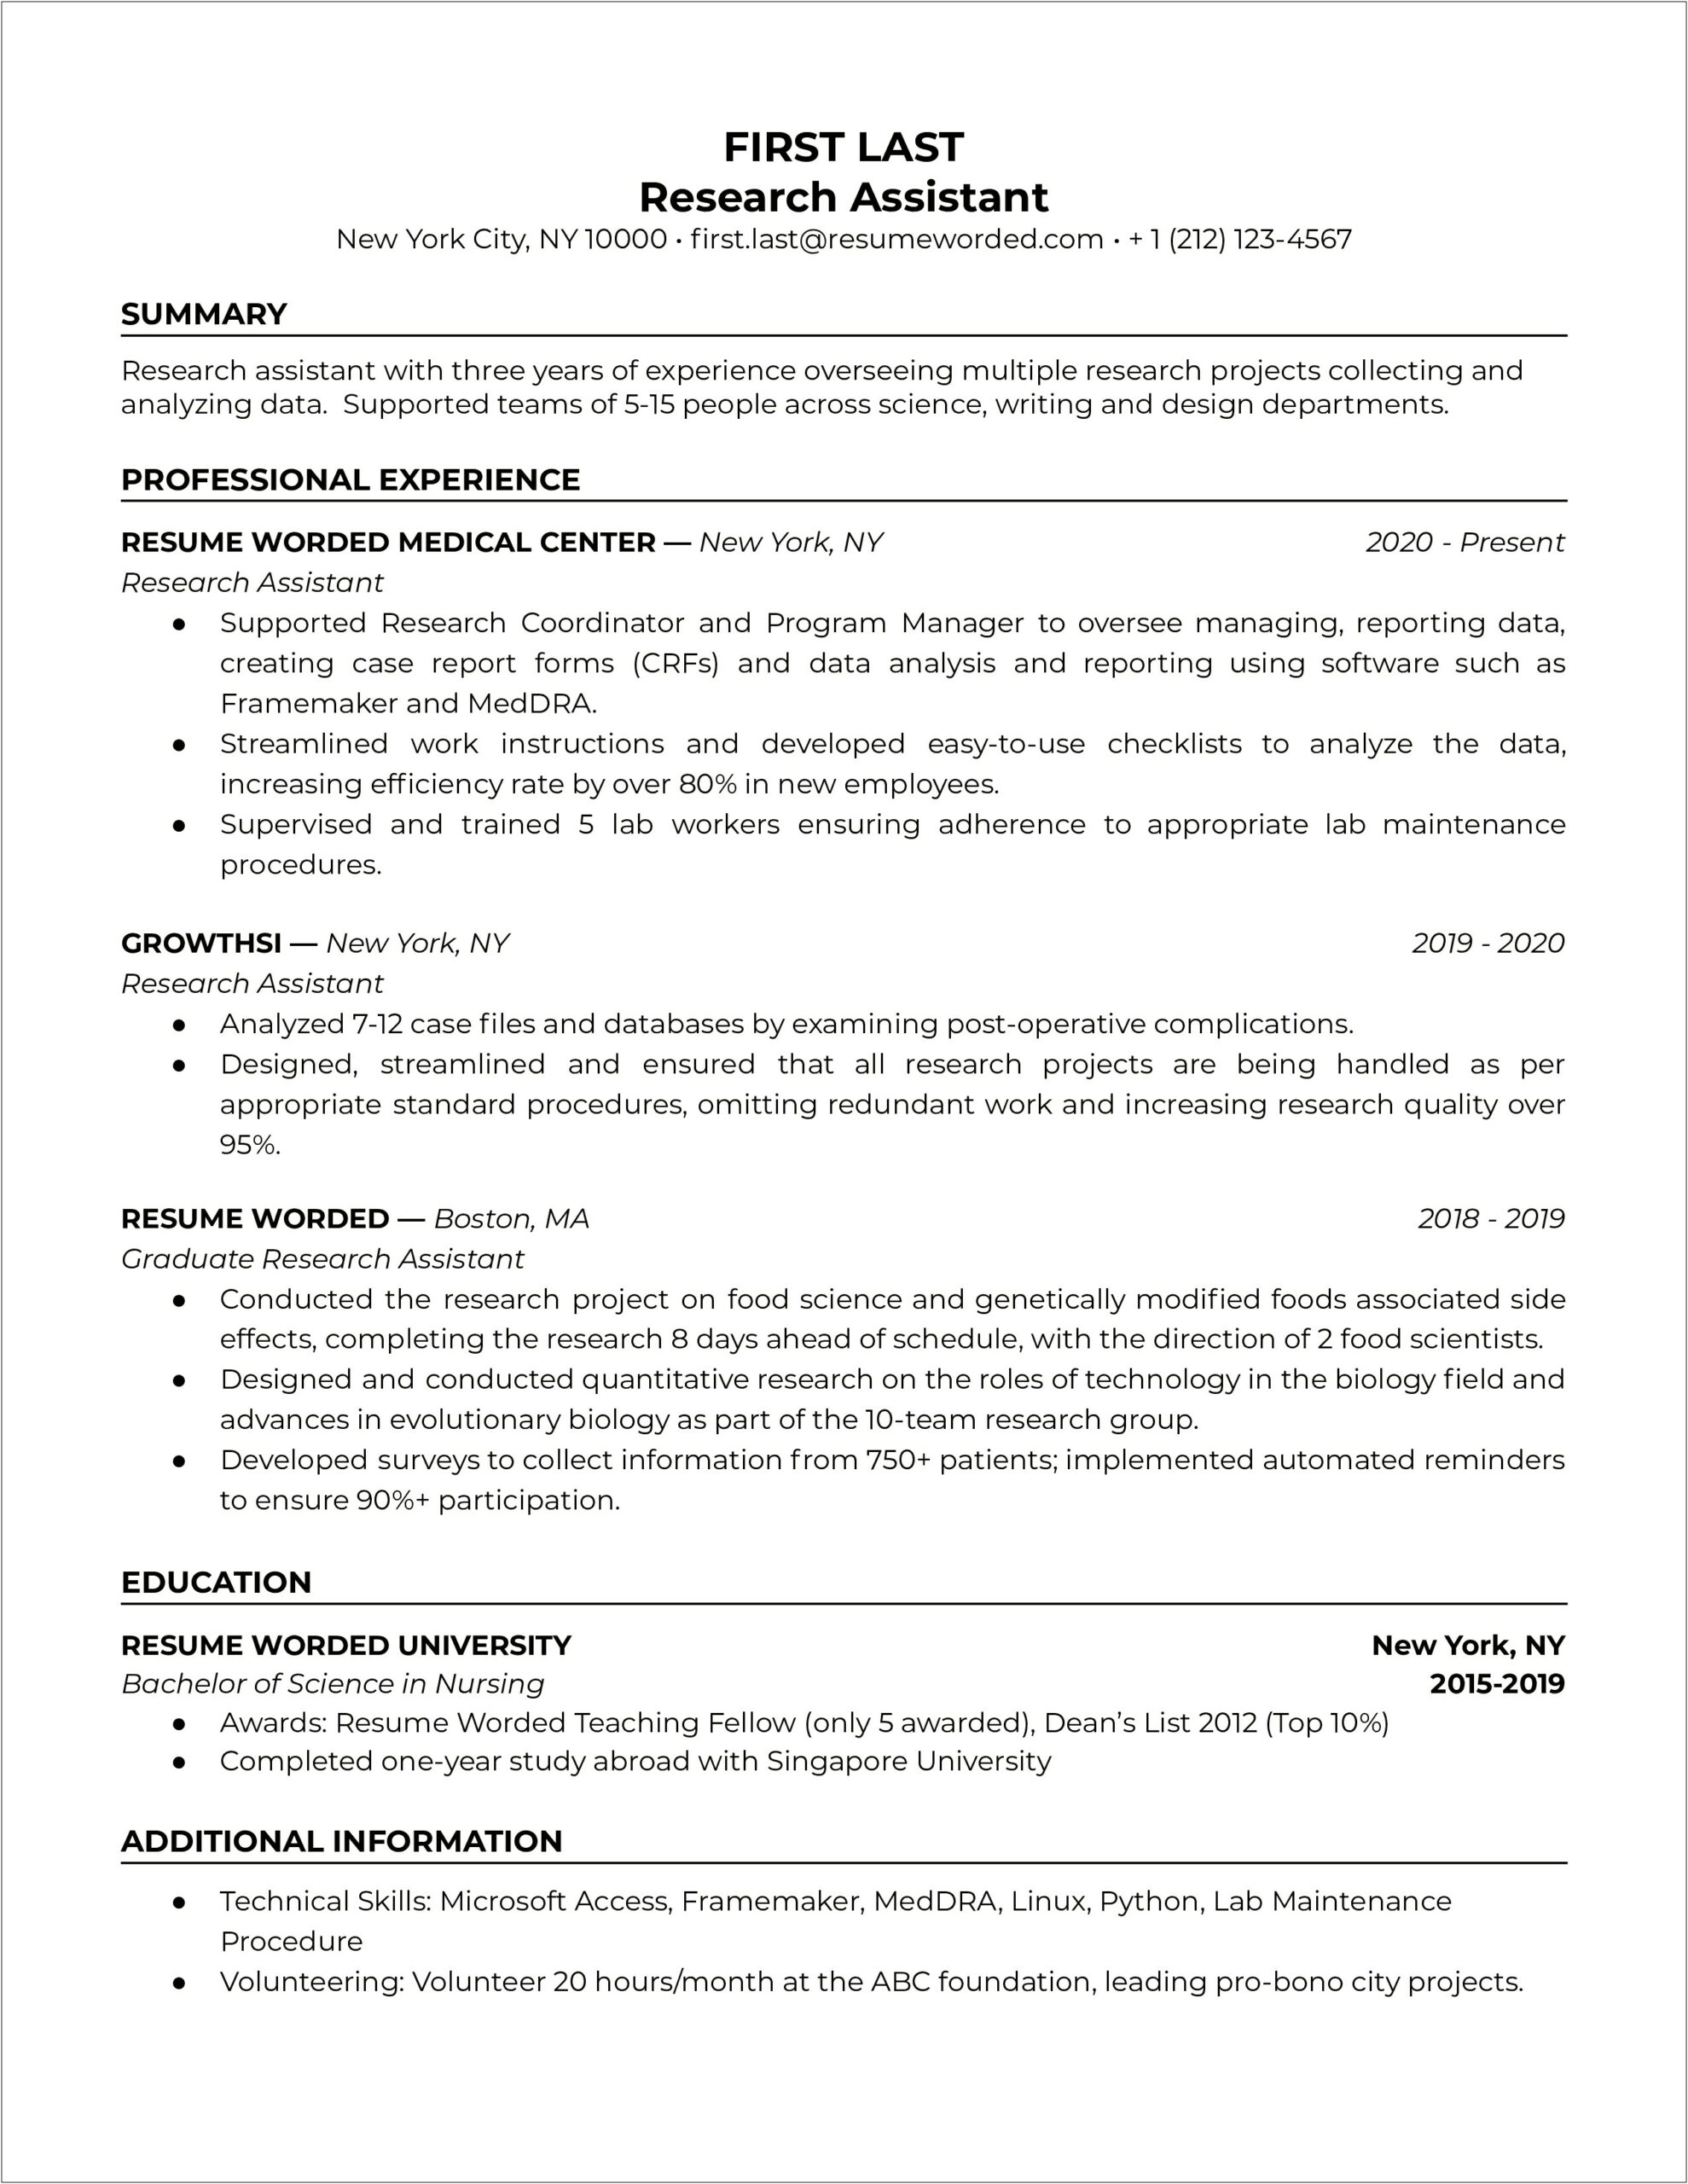 Sample Resume Templates For Medical Research